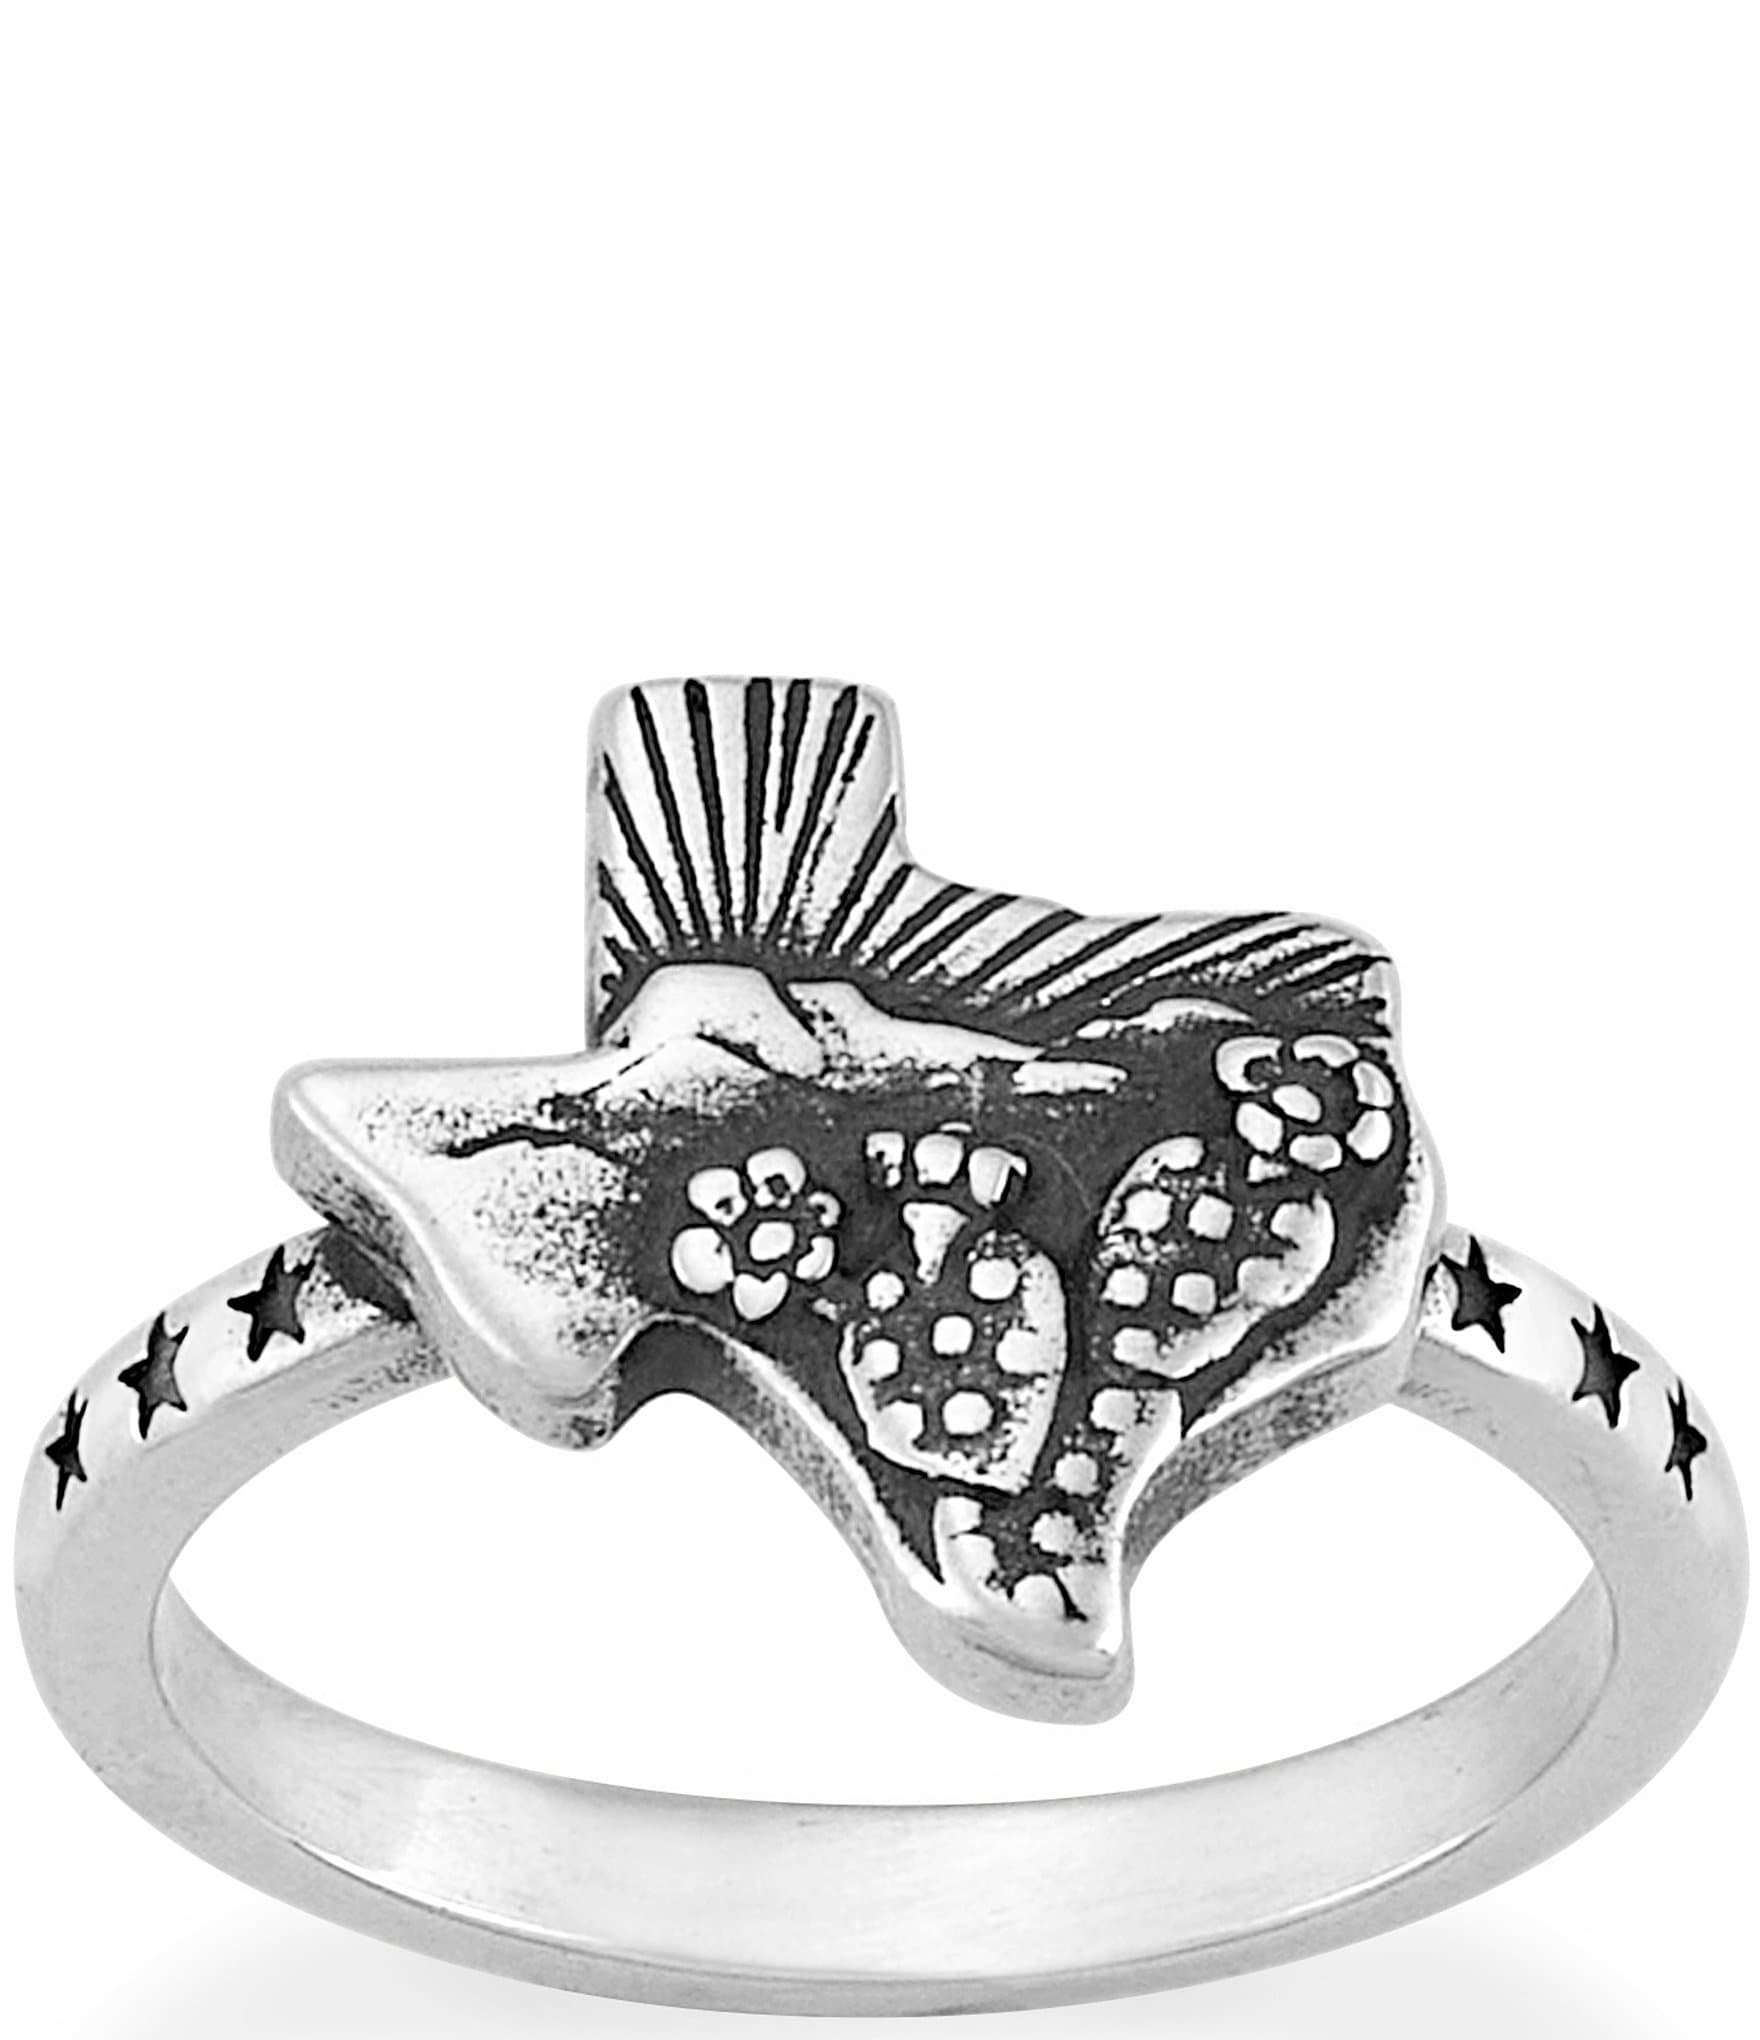 Stars of Texas Ring in Sterling Silver